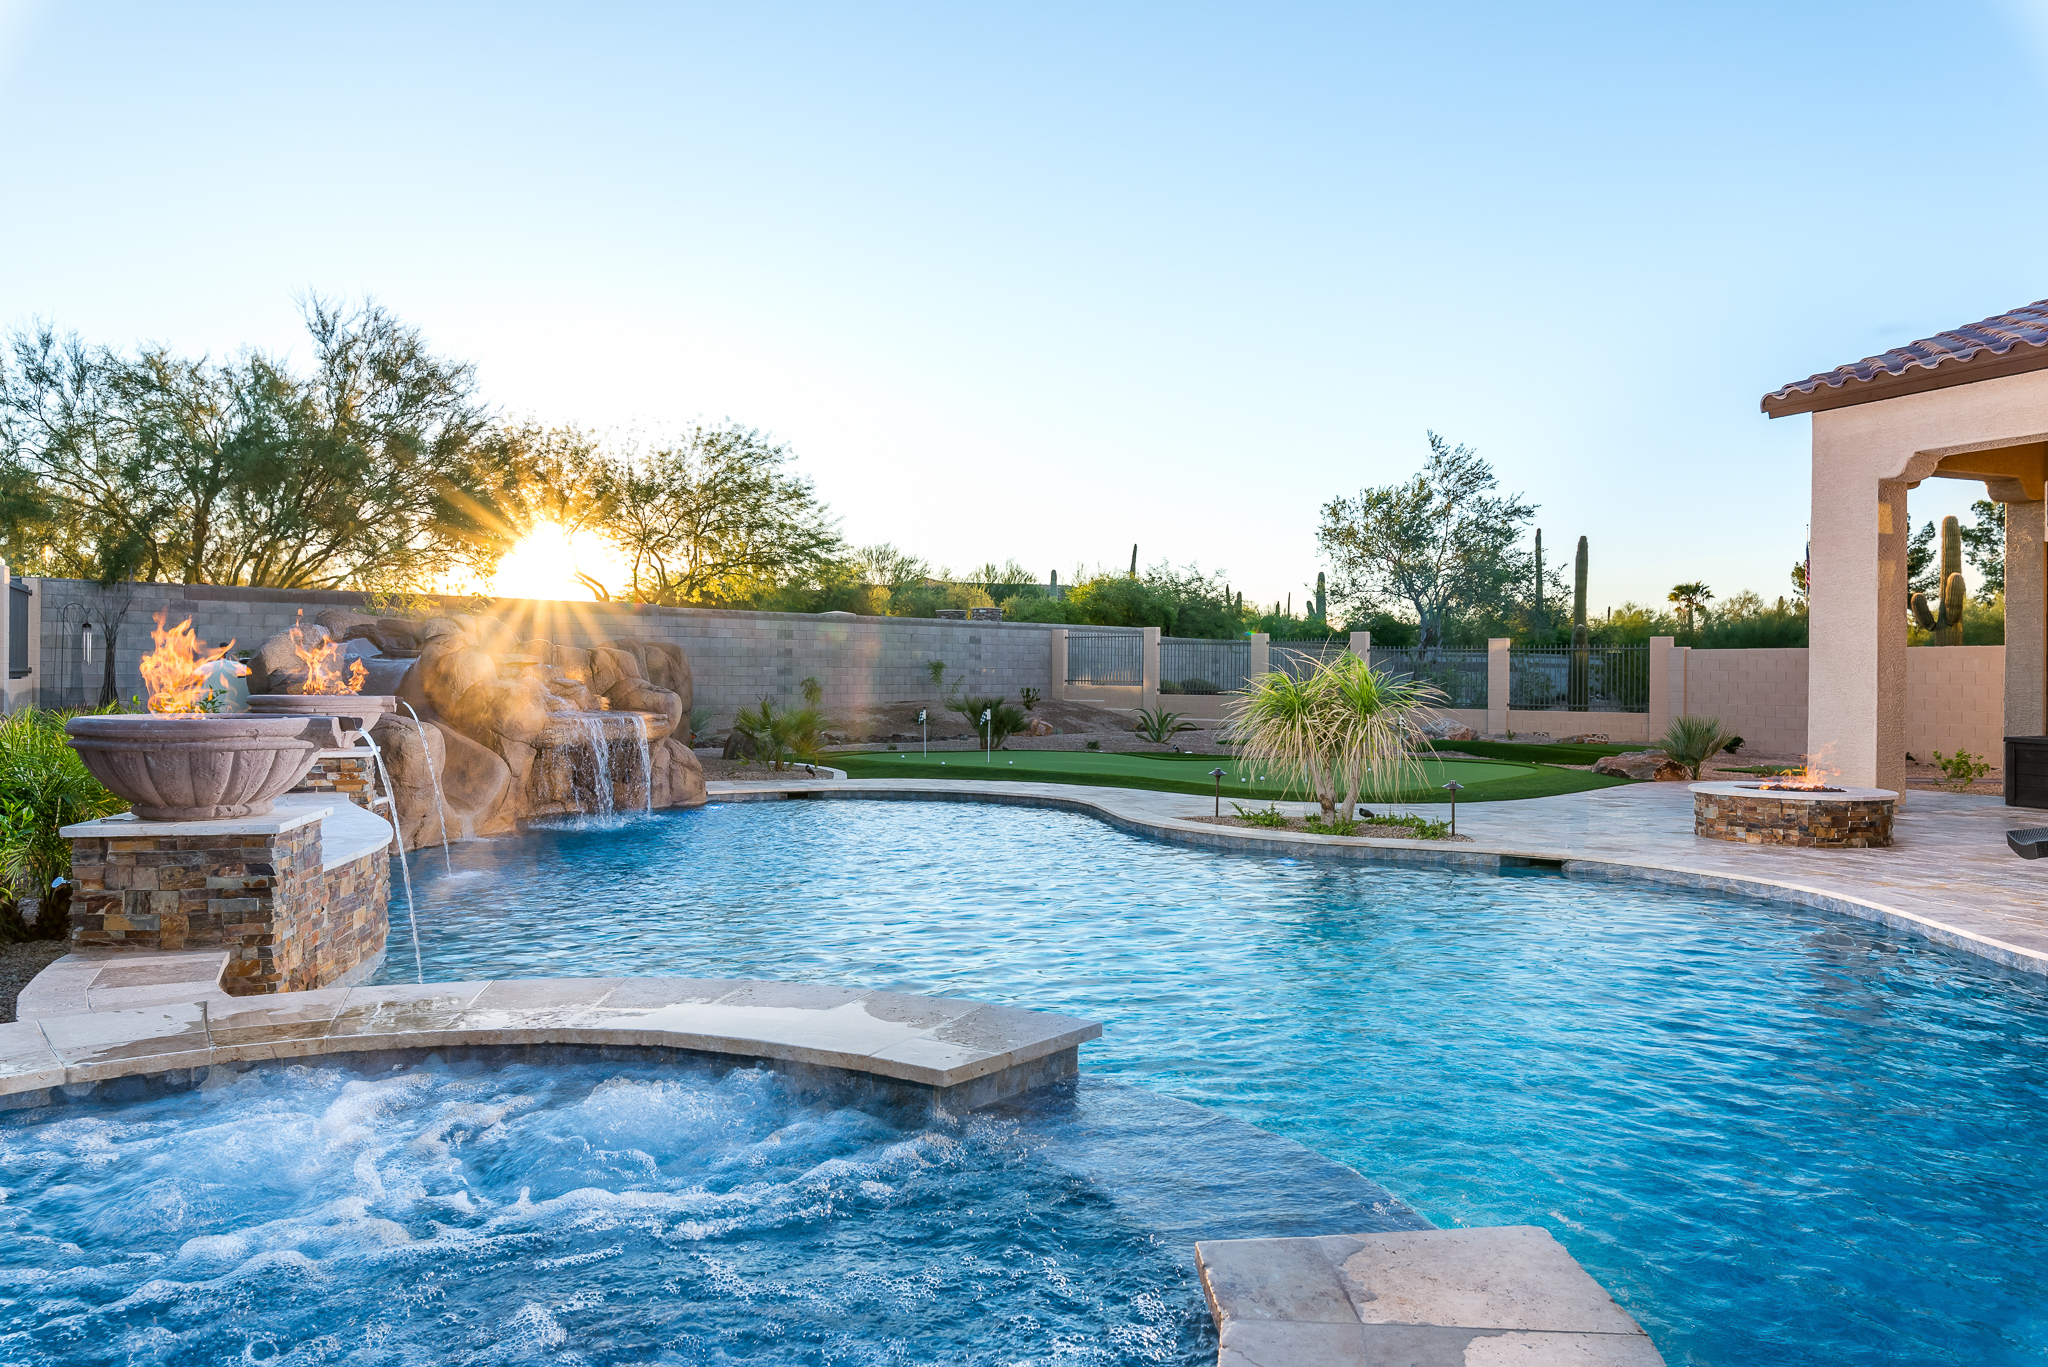 Mesa Swimming Pool Design Presidential Pools Karin Tierney with Spa Fire Features and Waterfall with Slide